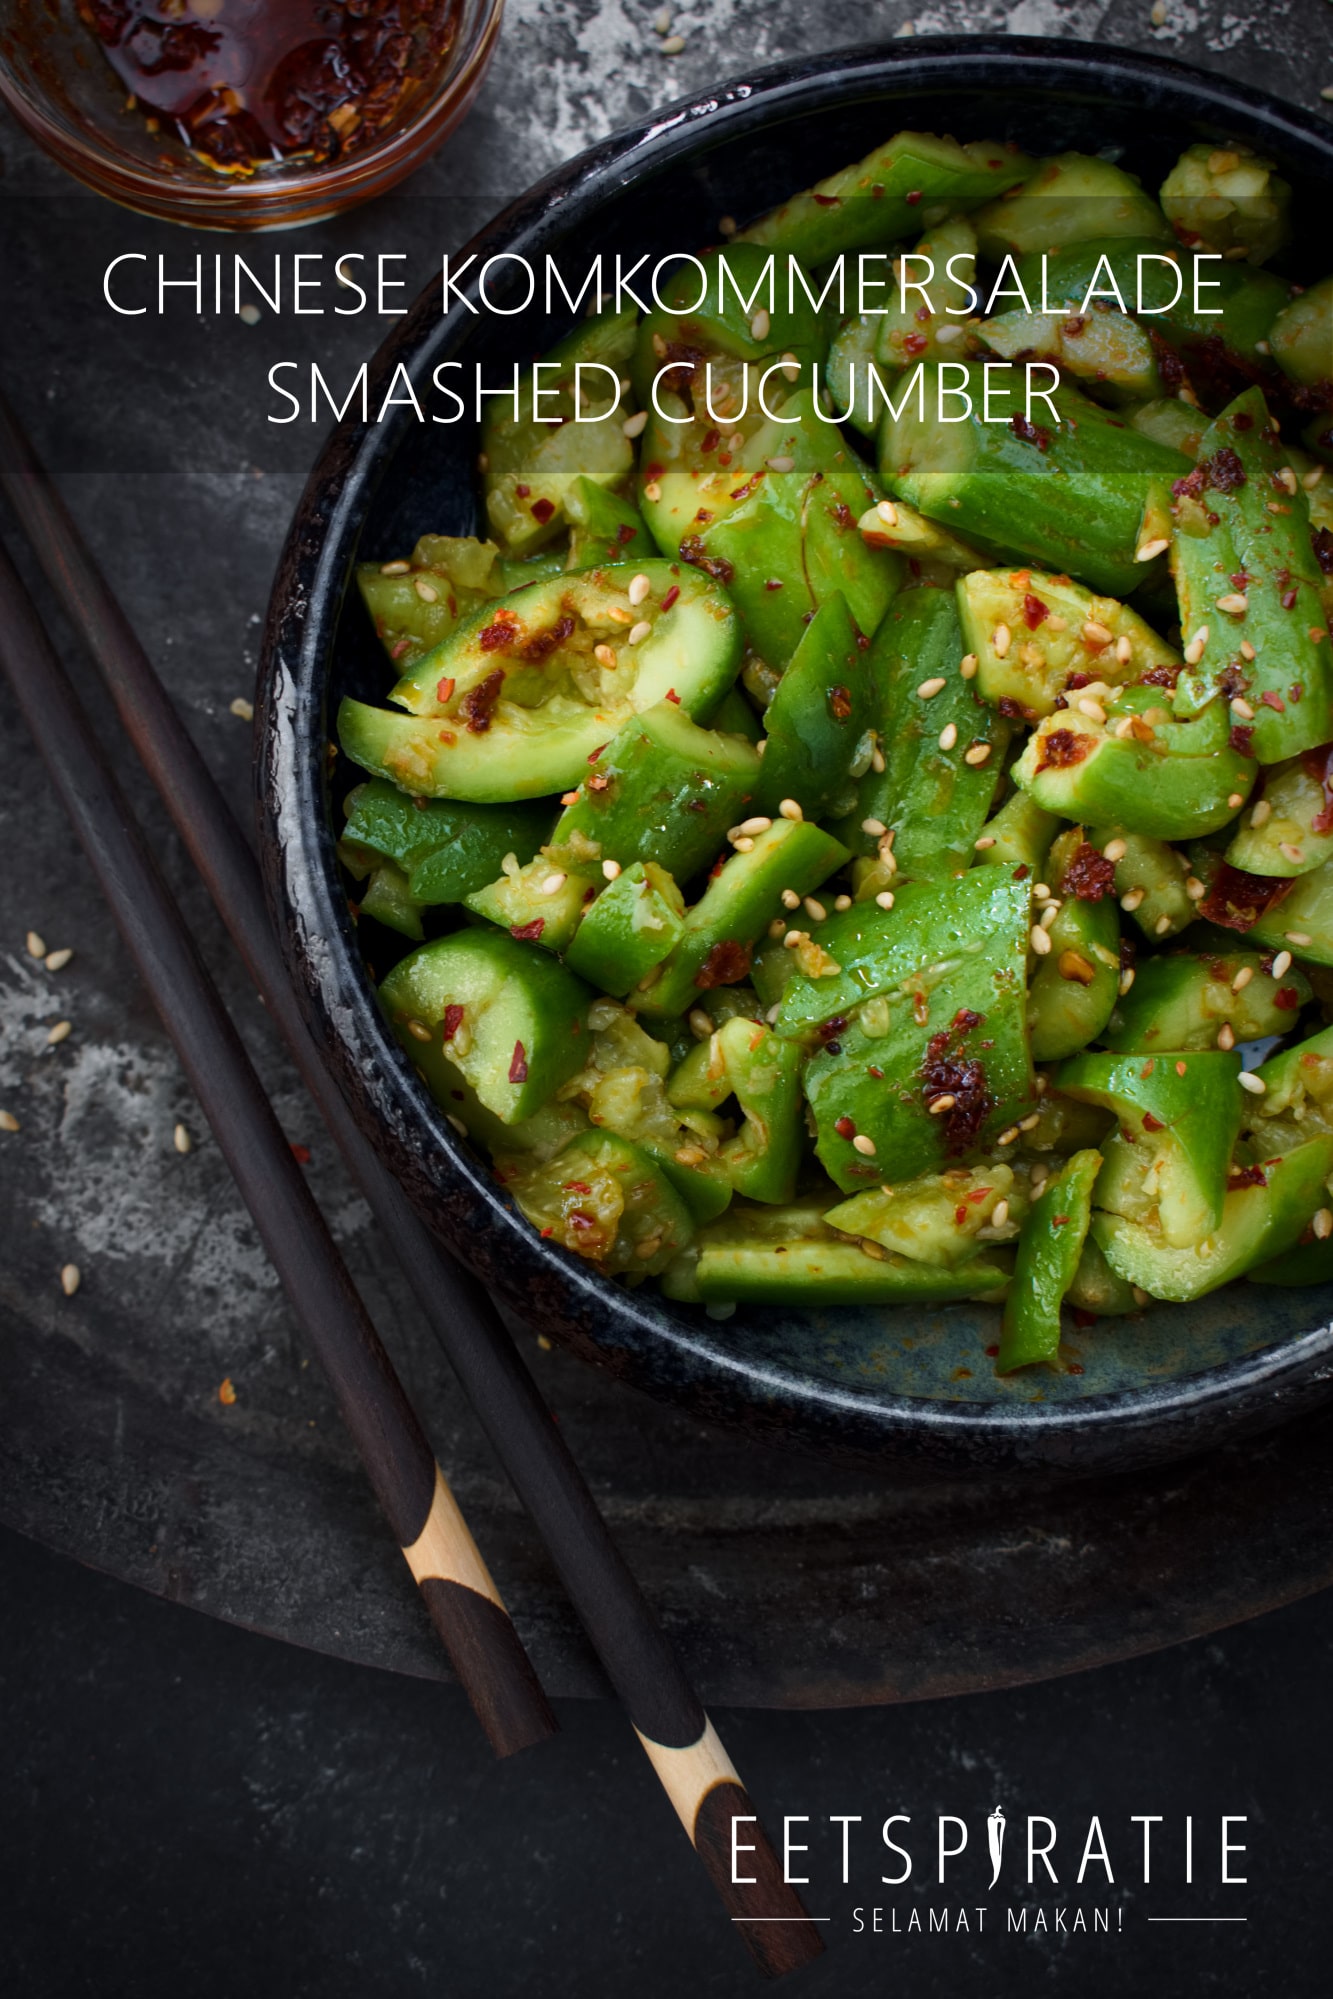 Chinese komkommersalade (smashed cucumber)